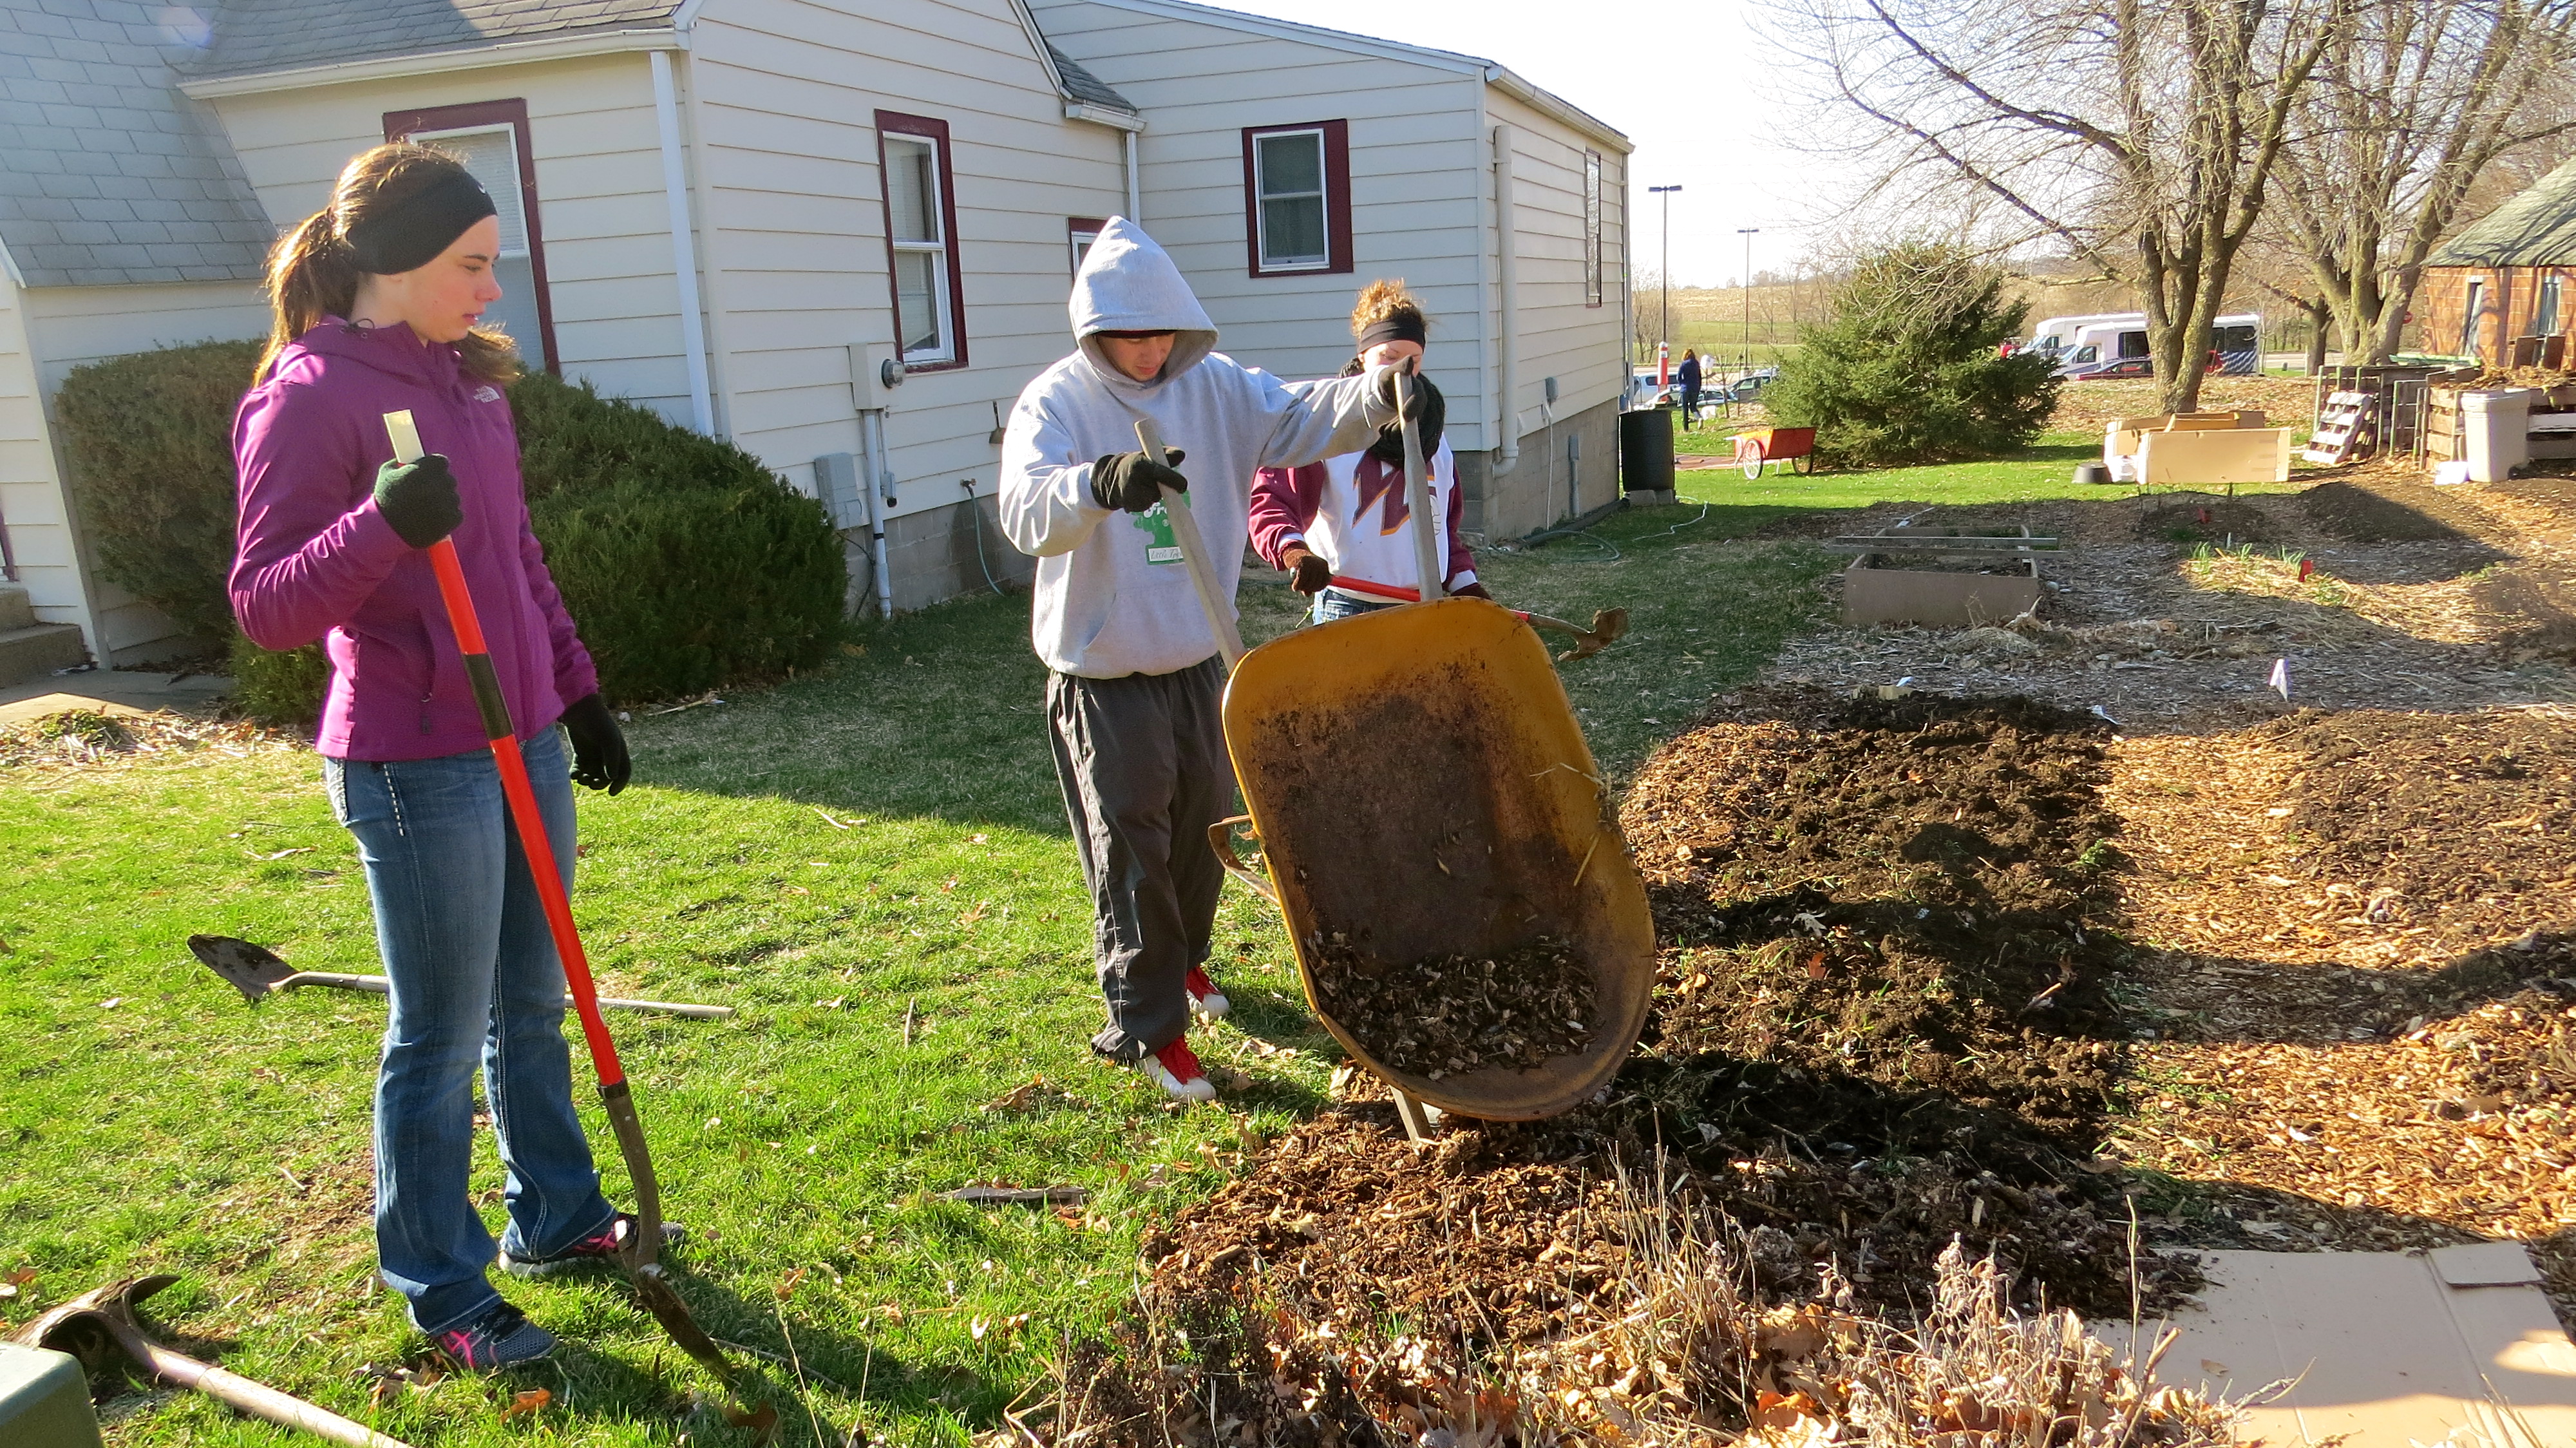 Central College receives national honor for community service